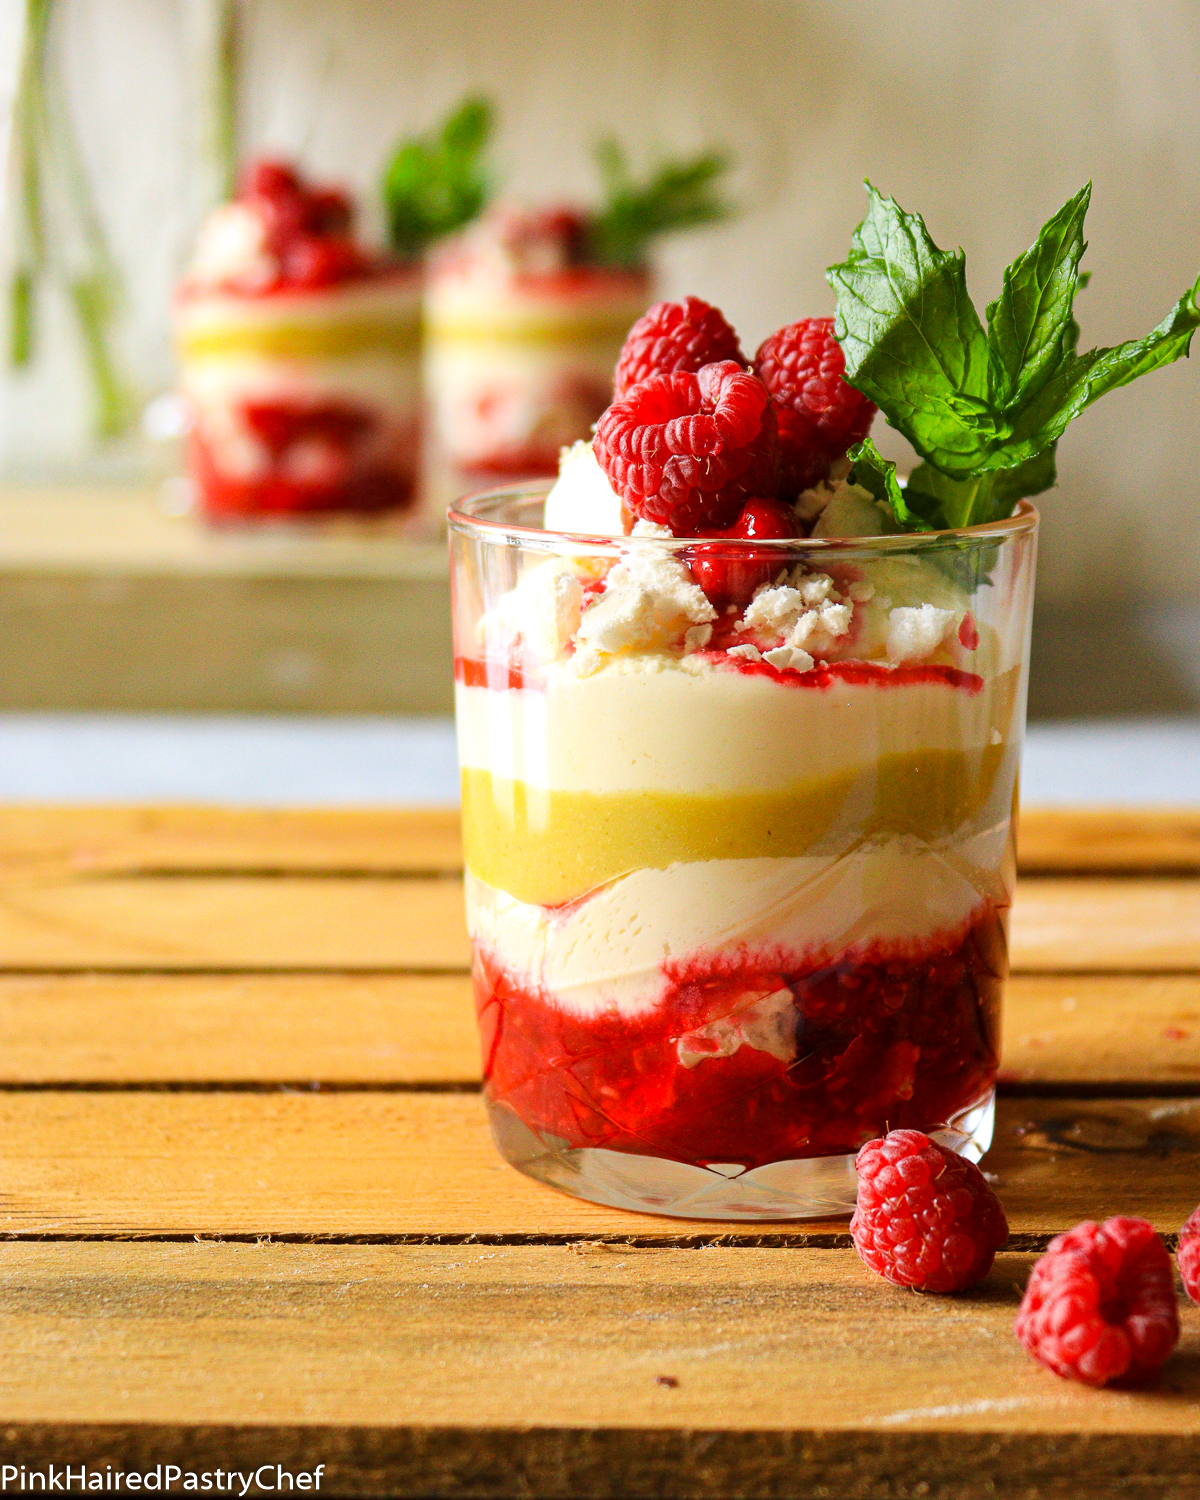 Layered Gooseberry Raspberry Eton Mess in a glass. Layers of crushed meringue, raspberry sauce, whipped cream, gooseberry curd, fresh raspberries and mint on top.